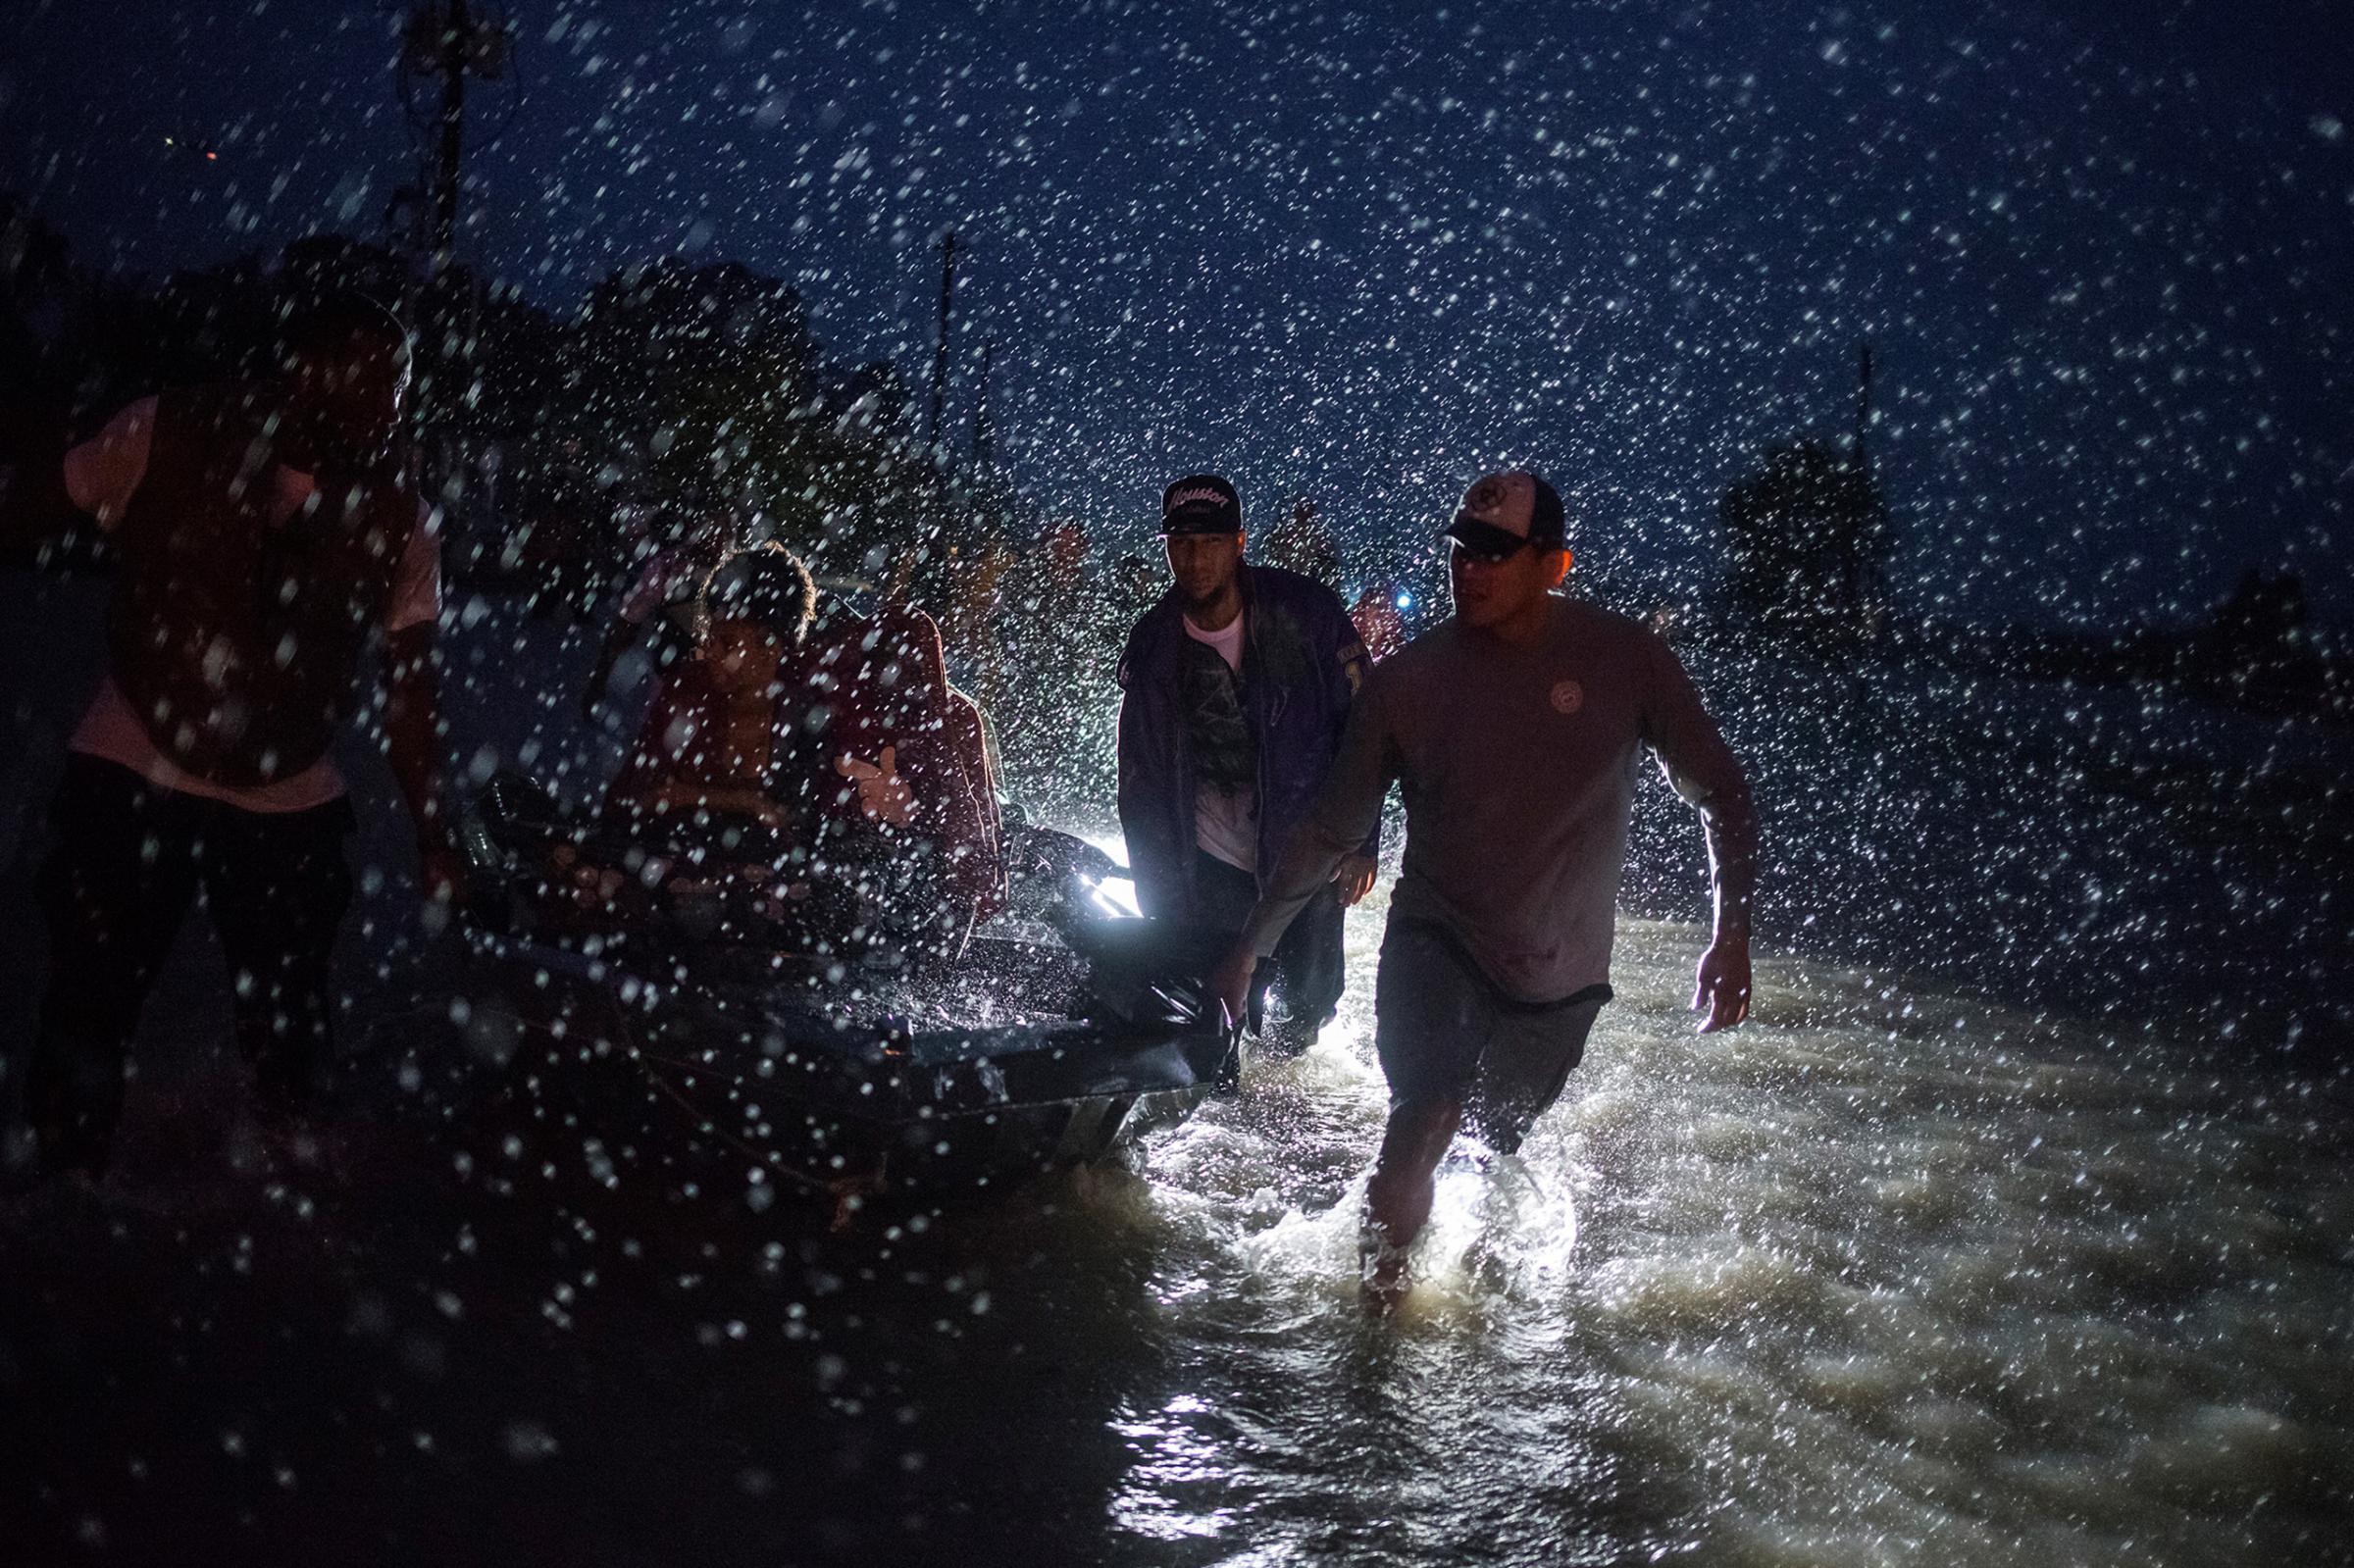 Samaritans help push a boat with evacuees to high ground during a rain storm caused by Tropical Storm Harvey along Tidwell Road in east Houston